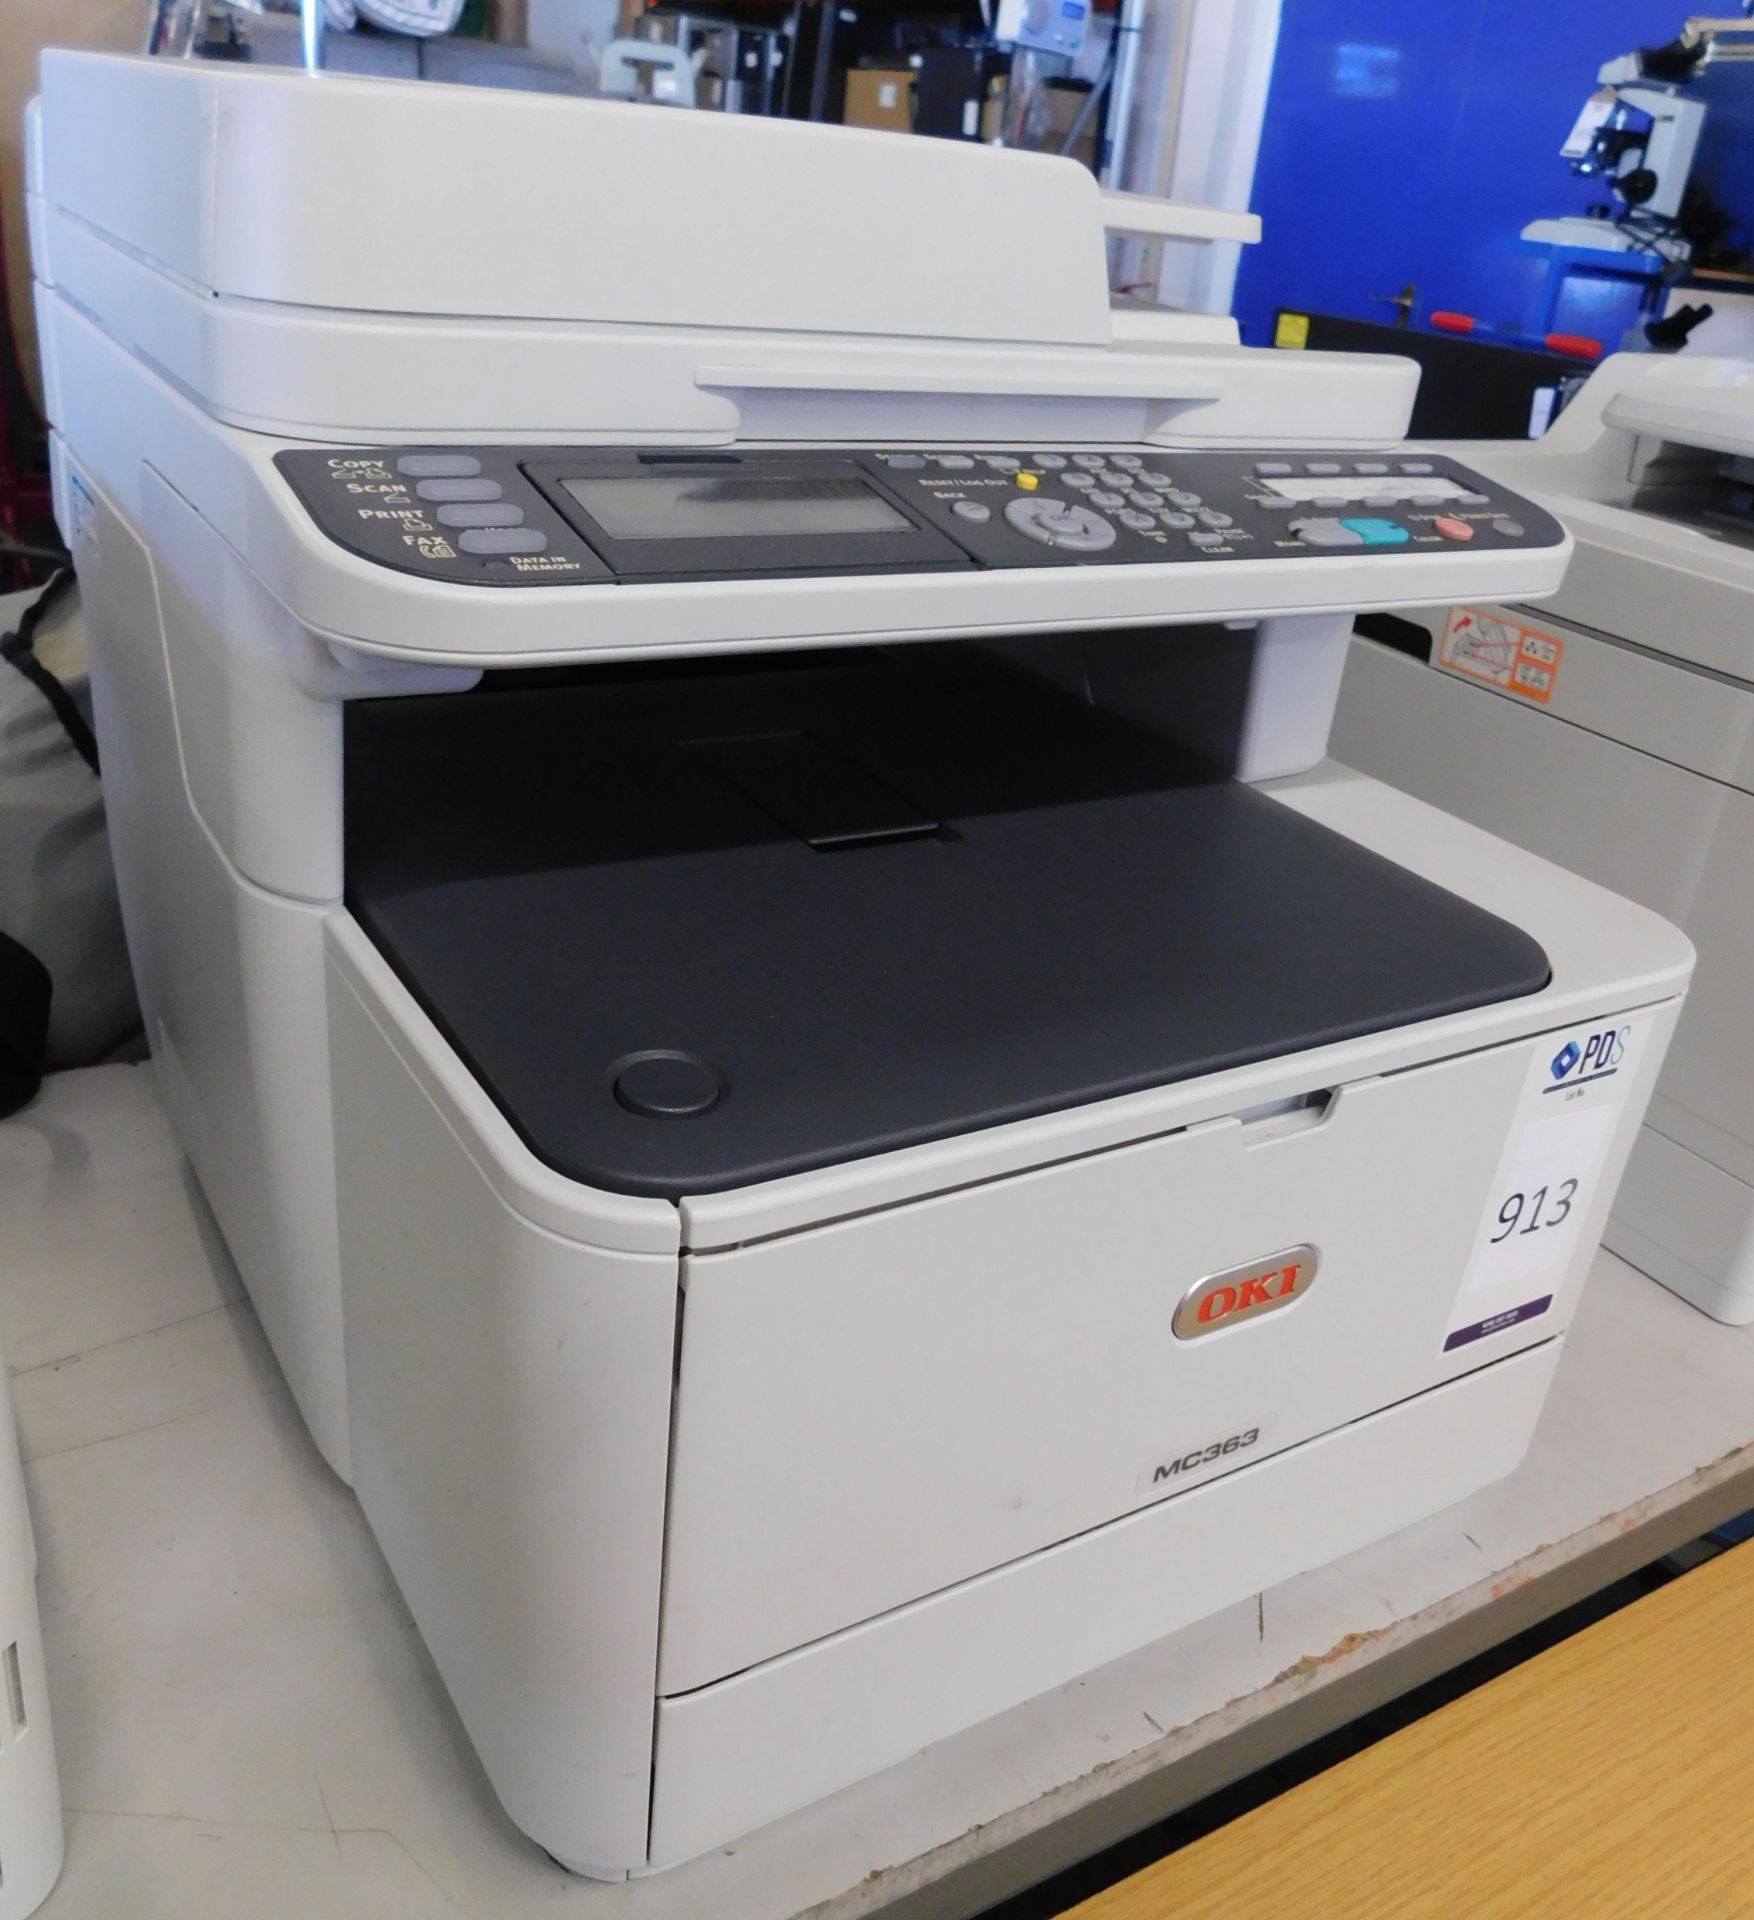 Oki MC363 Multi-Function Printer (Location: Stockport. Please Refer to General Notes)